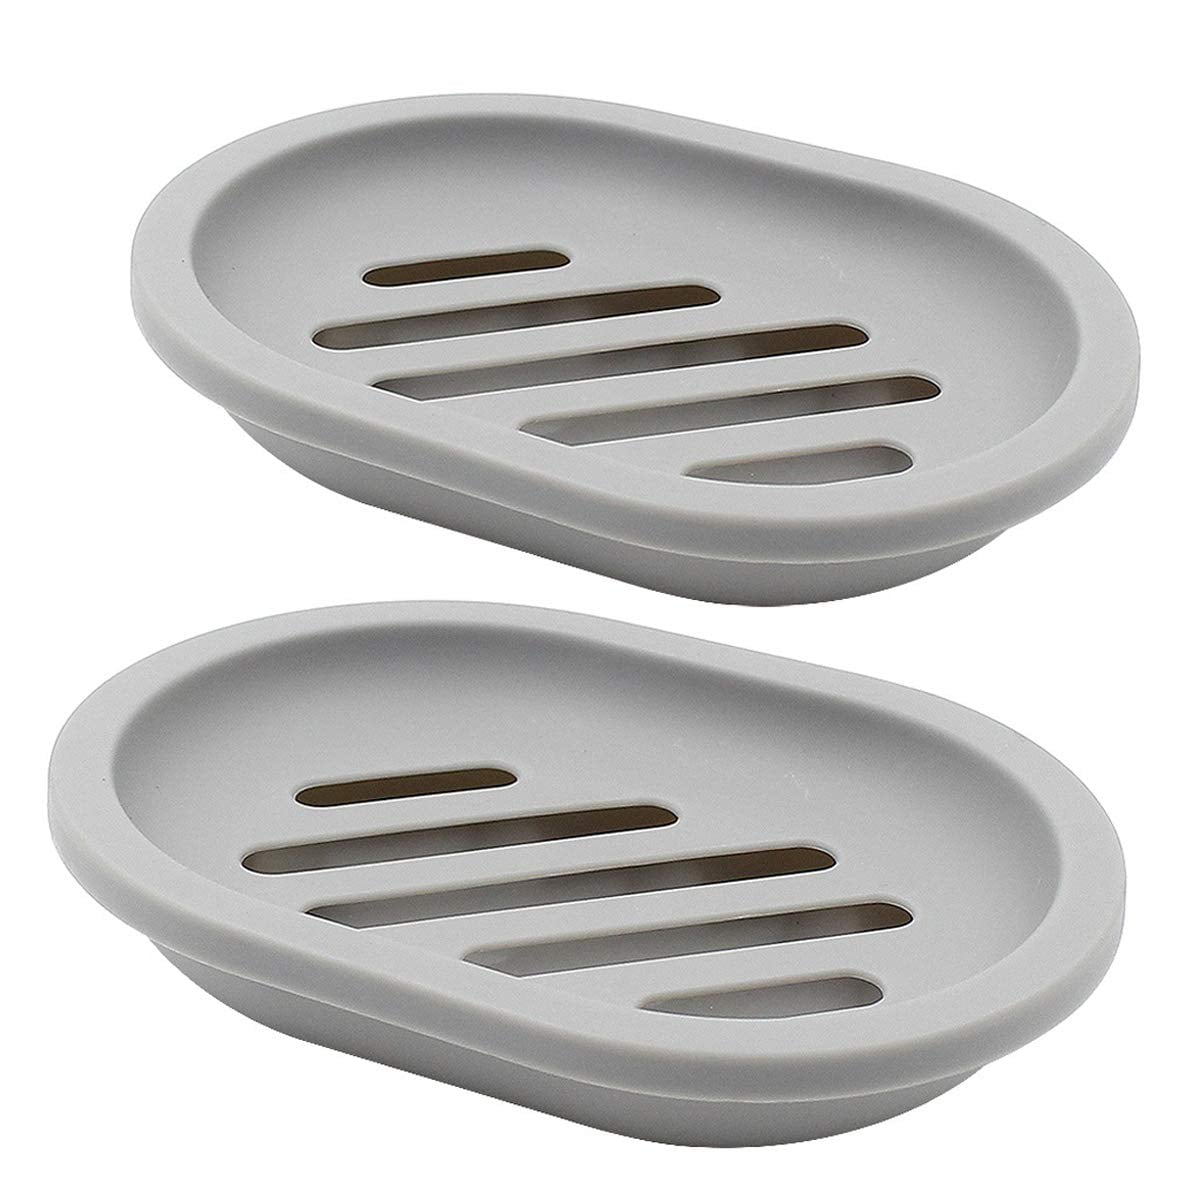 Dry, 2-Pack Soap Holder Dish with Drain Soap Holder,Soap Saver Easy Cleaning